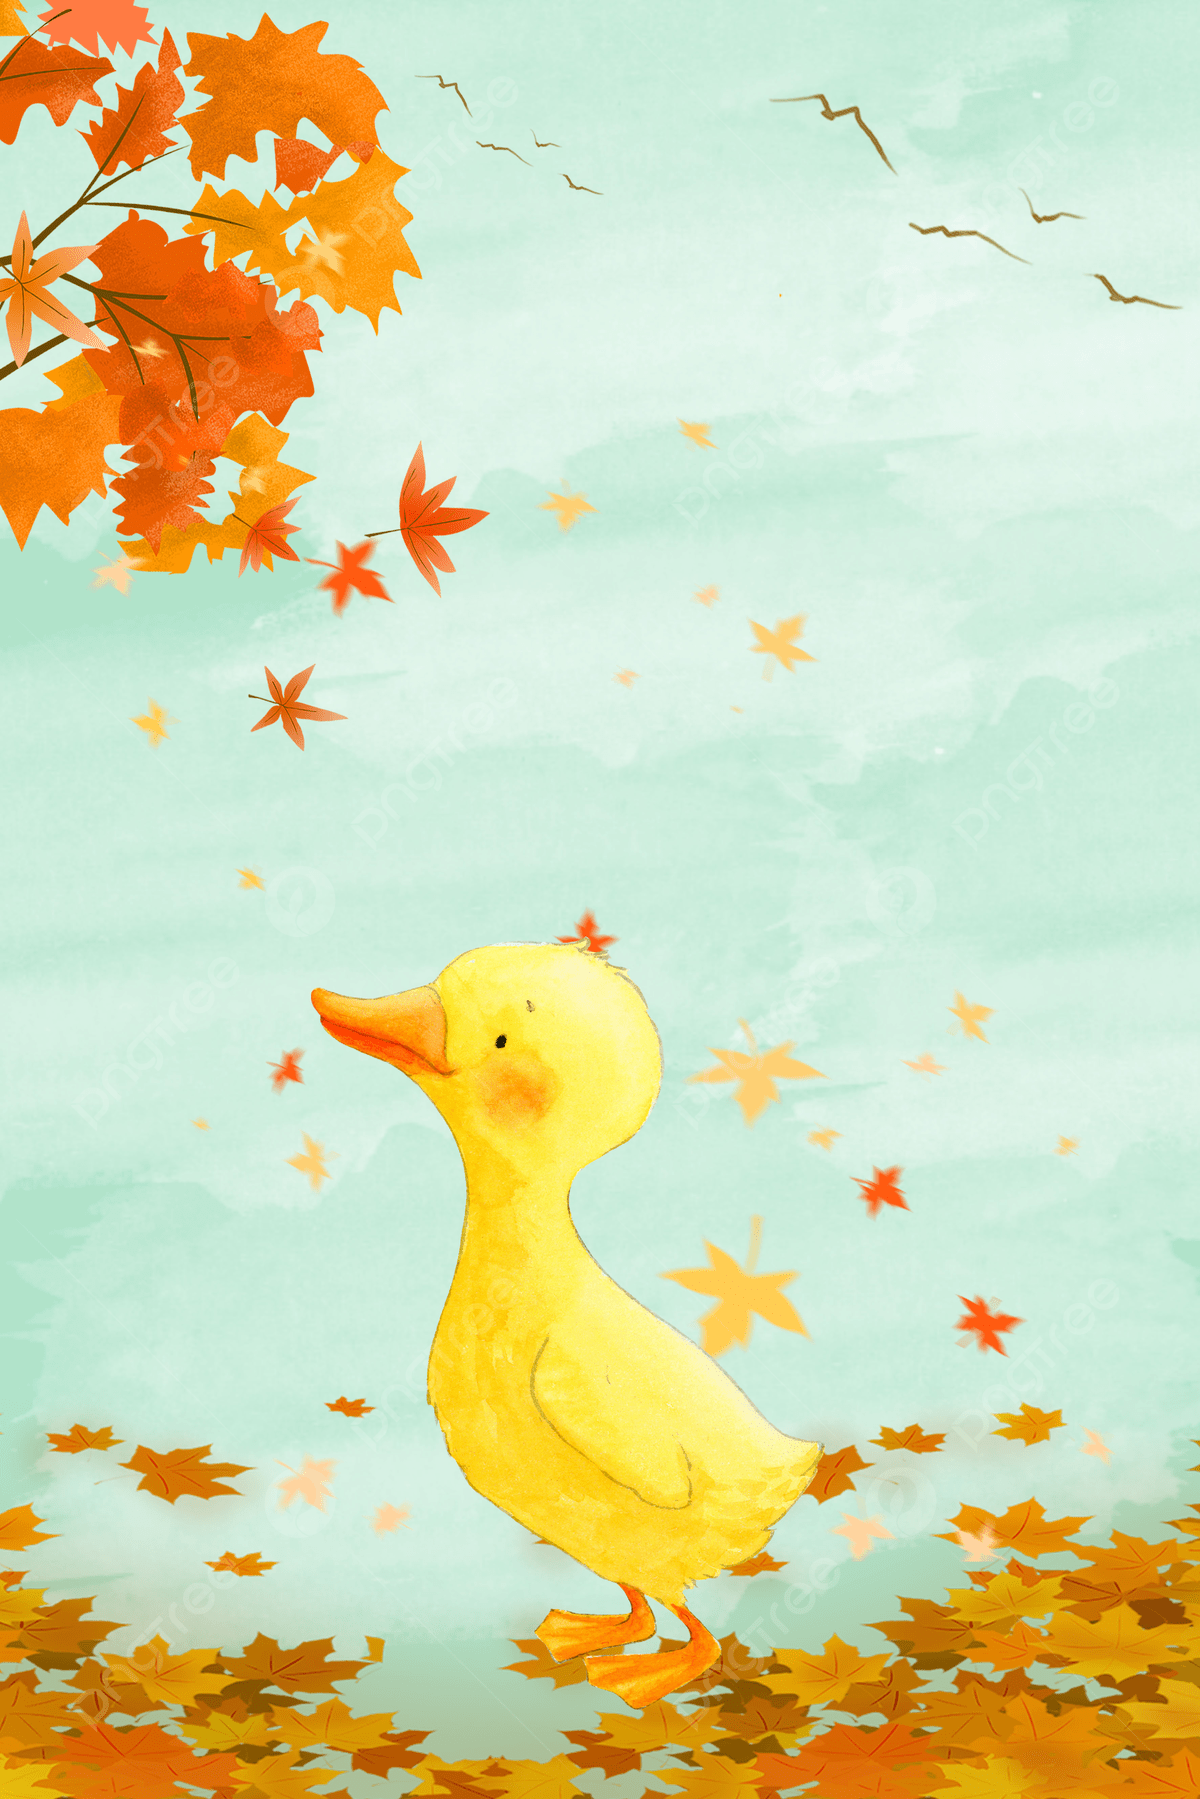 A duck walking in the fall leaves - Duck